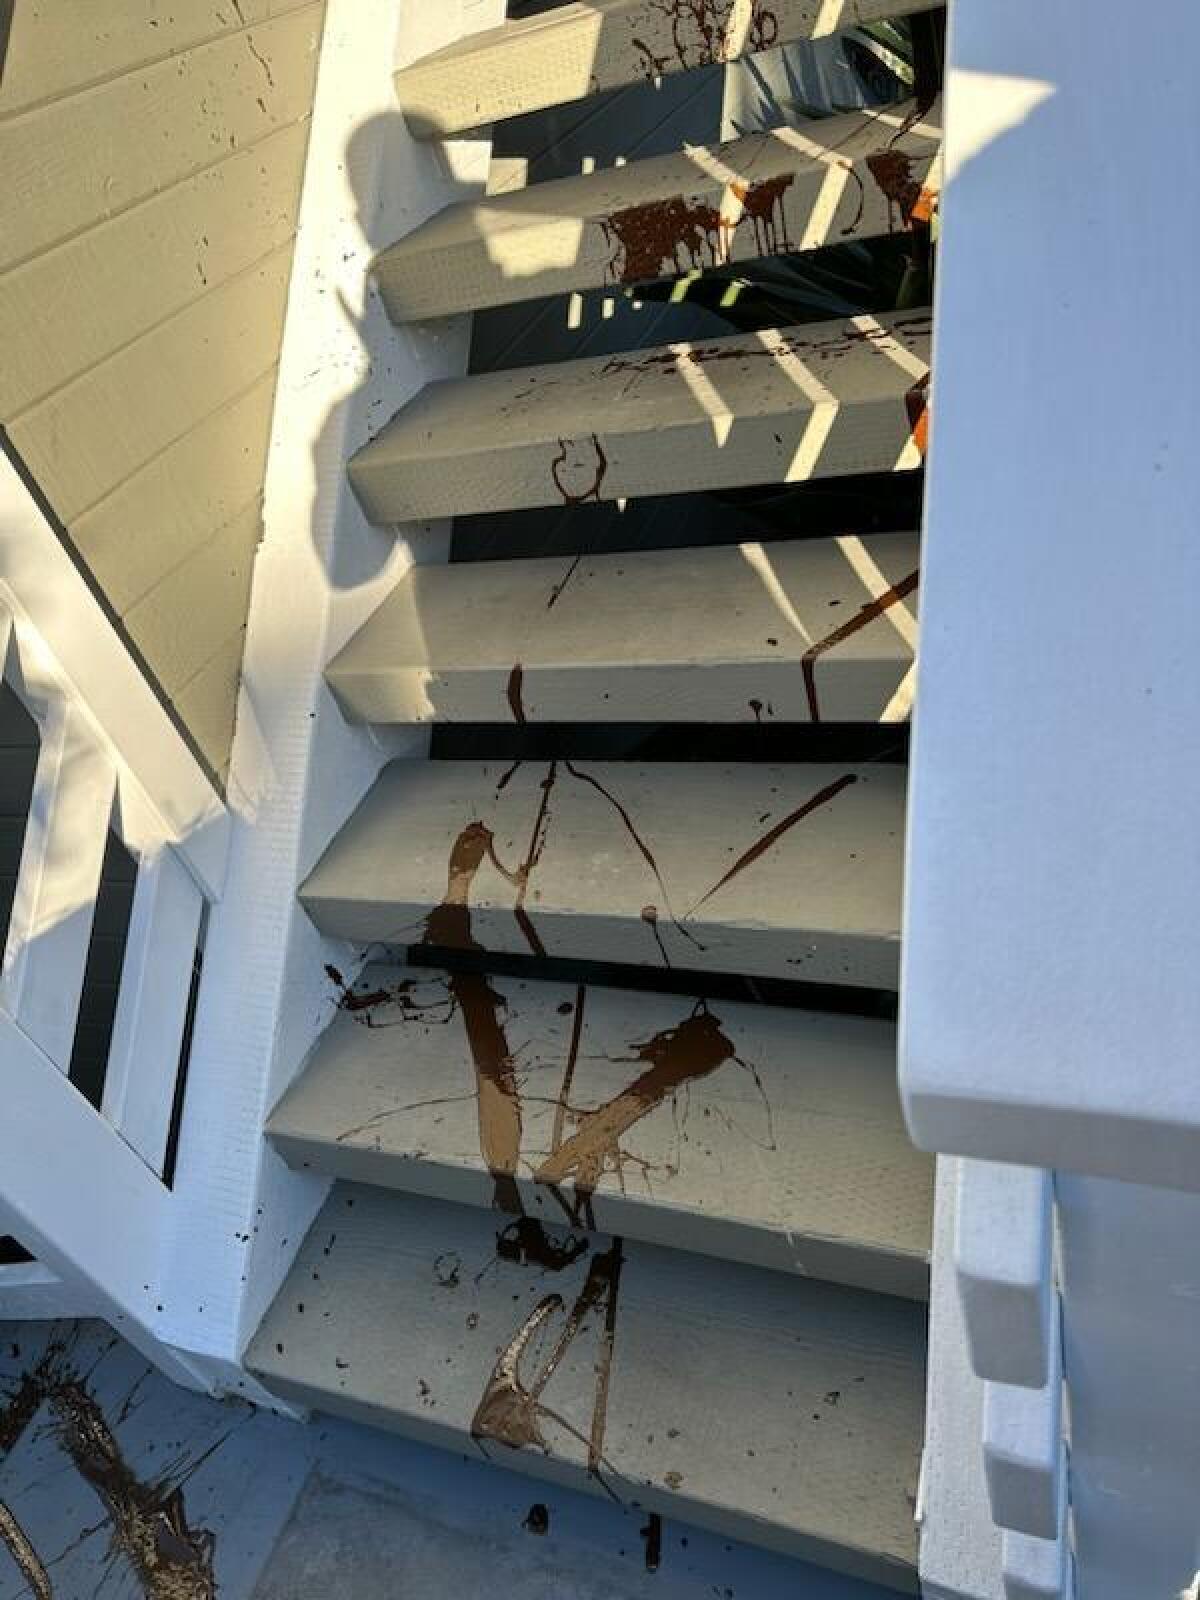 Feces smeared on stairs leading to a home